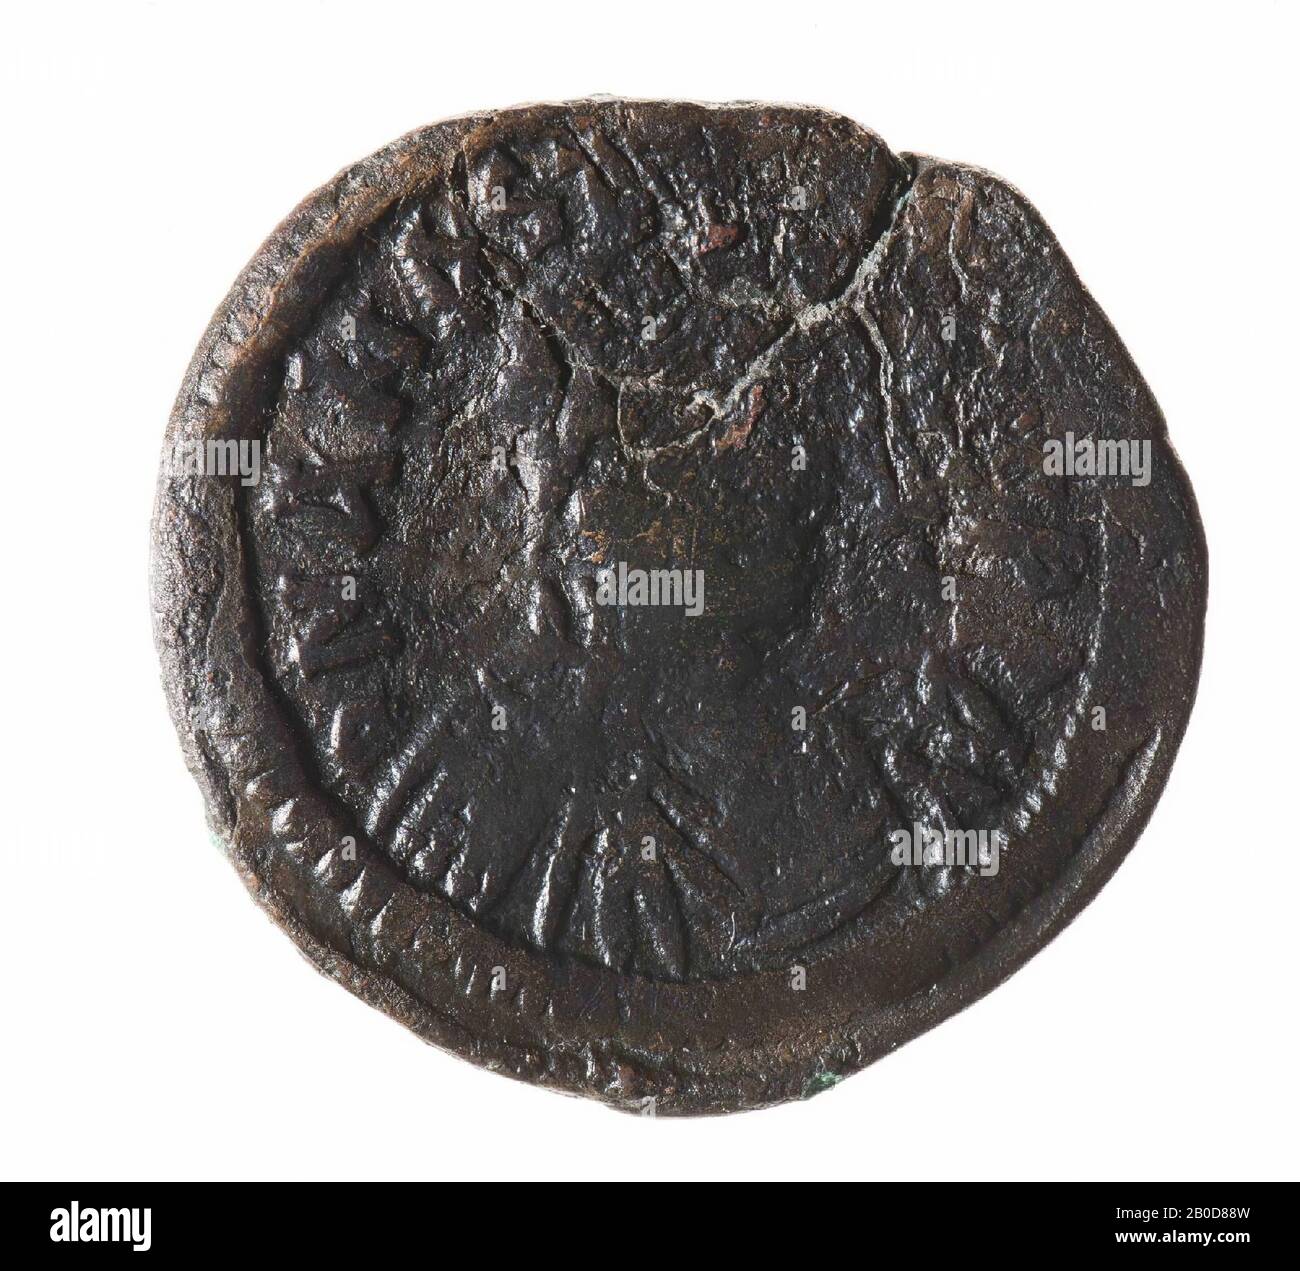 Obverse: Anastasius, right, dressed. Very worn off, remnants of inscription. Reverse: Large M, left and right a star, above a cross, under worn. At the bottom coin remnants of inscription, presumably CON. The large (Greek) letter stands for a number and indicates the coin value. M is 40 nummi, a follis. The small letter below the number (worn here) refers to the workshop where the coin is minted and the letters at the bottom of the coin refer to the place where this workshop was located., Coin, follis of Anastasius I, Byzantine, metal, bronze, diam: 3.4 cm, wt. 15.75 grams, 491-518 AD, unknown Stock Photo